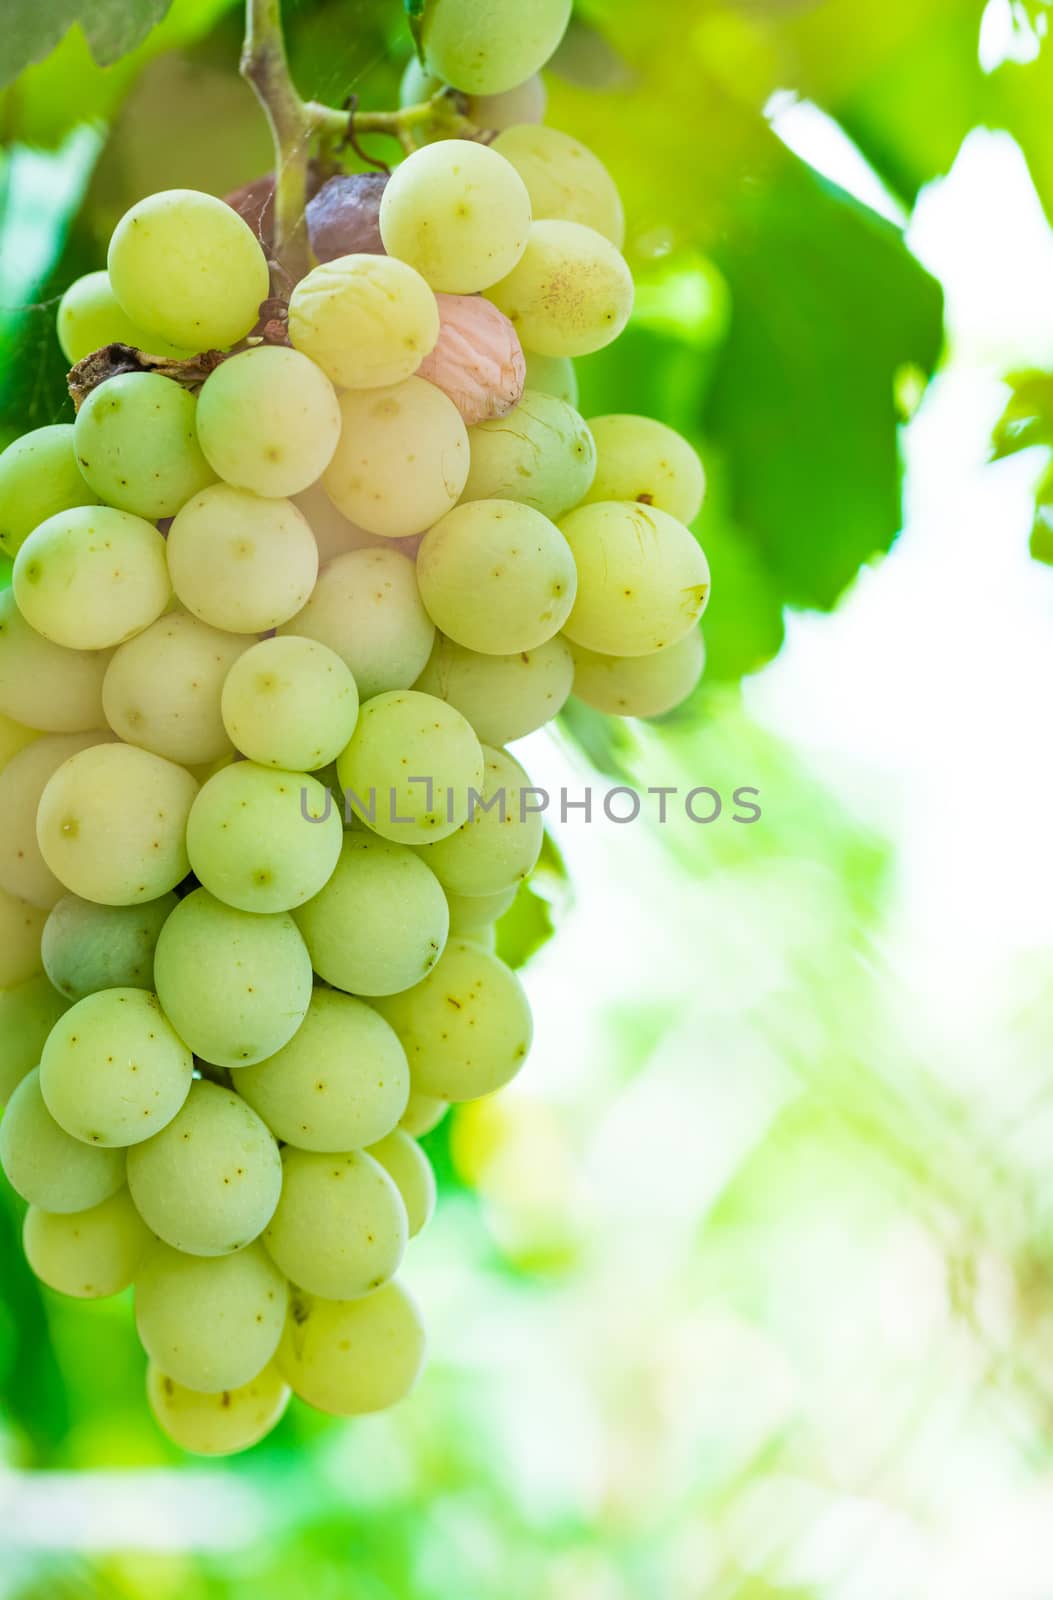 Yellow grapes with green leaves hanging on vine

